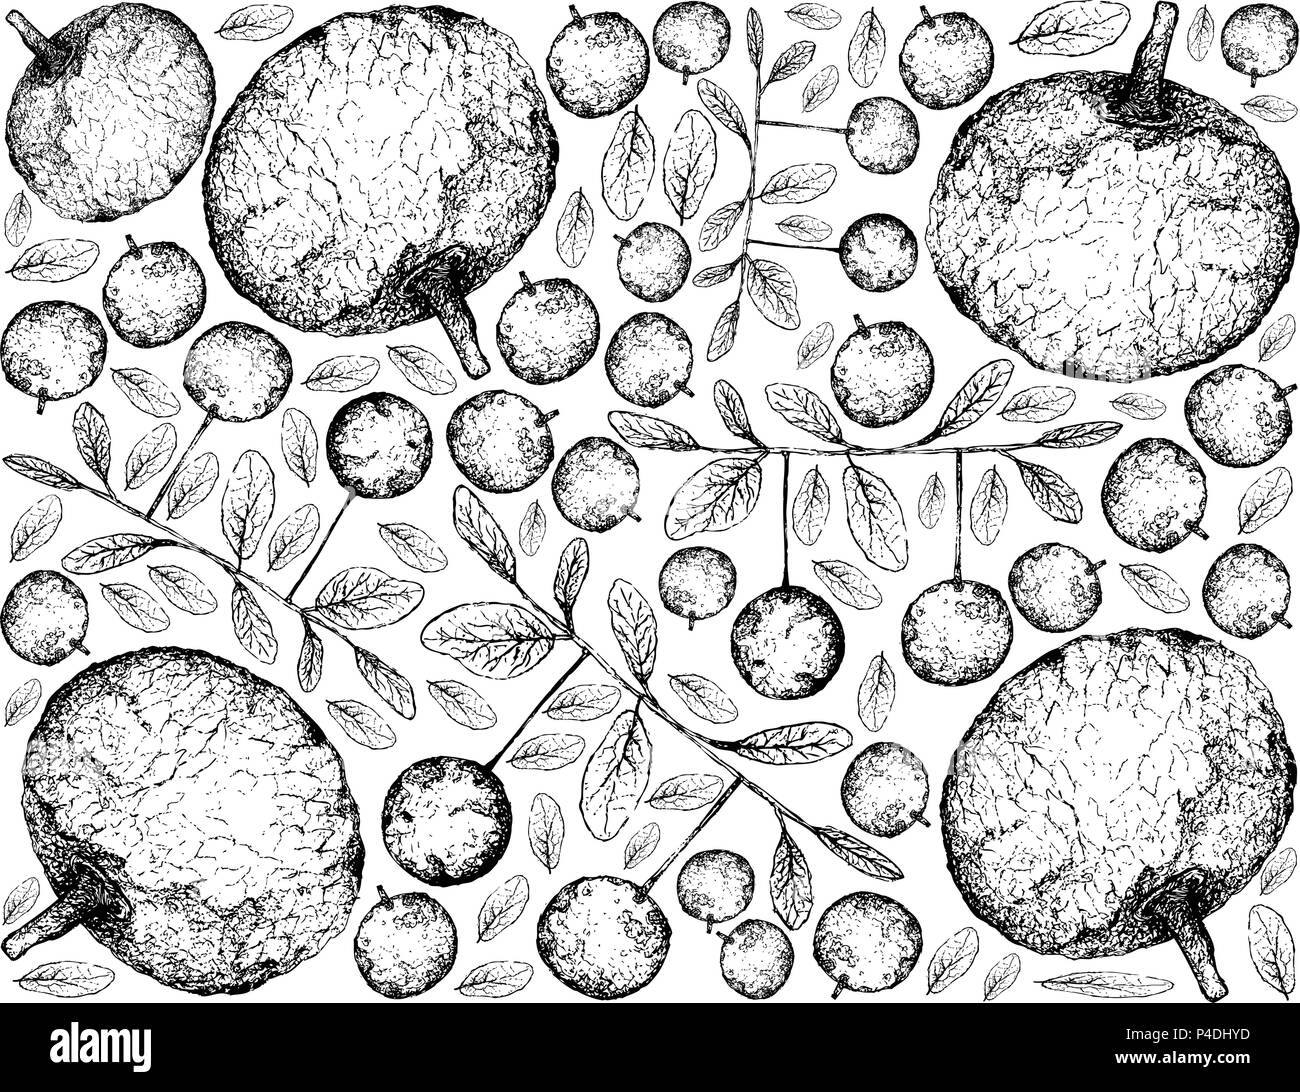 Tropical Fruit, Illustration Wallpaper Background of Hand Drawn Sketch Feroniella Lucida and Diospyros Filipendula Fruits Isolated on White Background Stock Vector